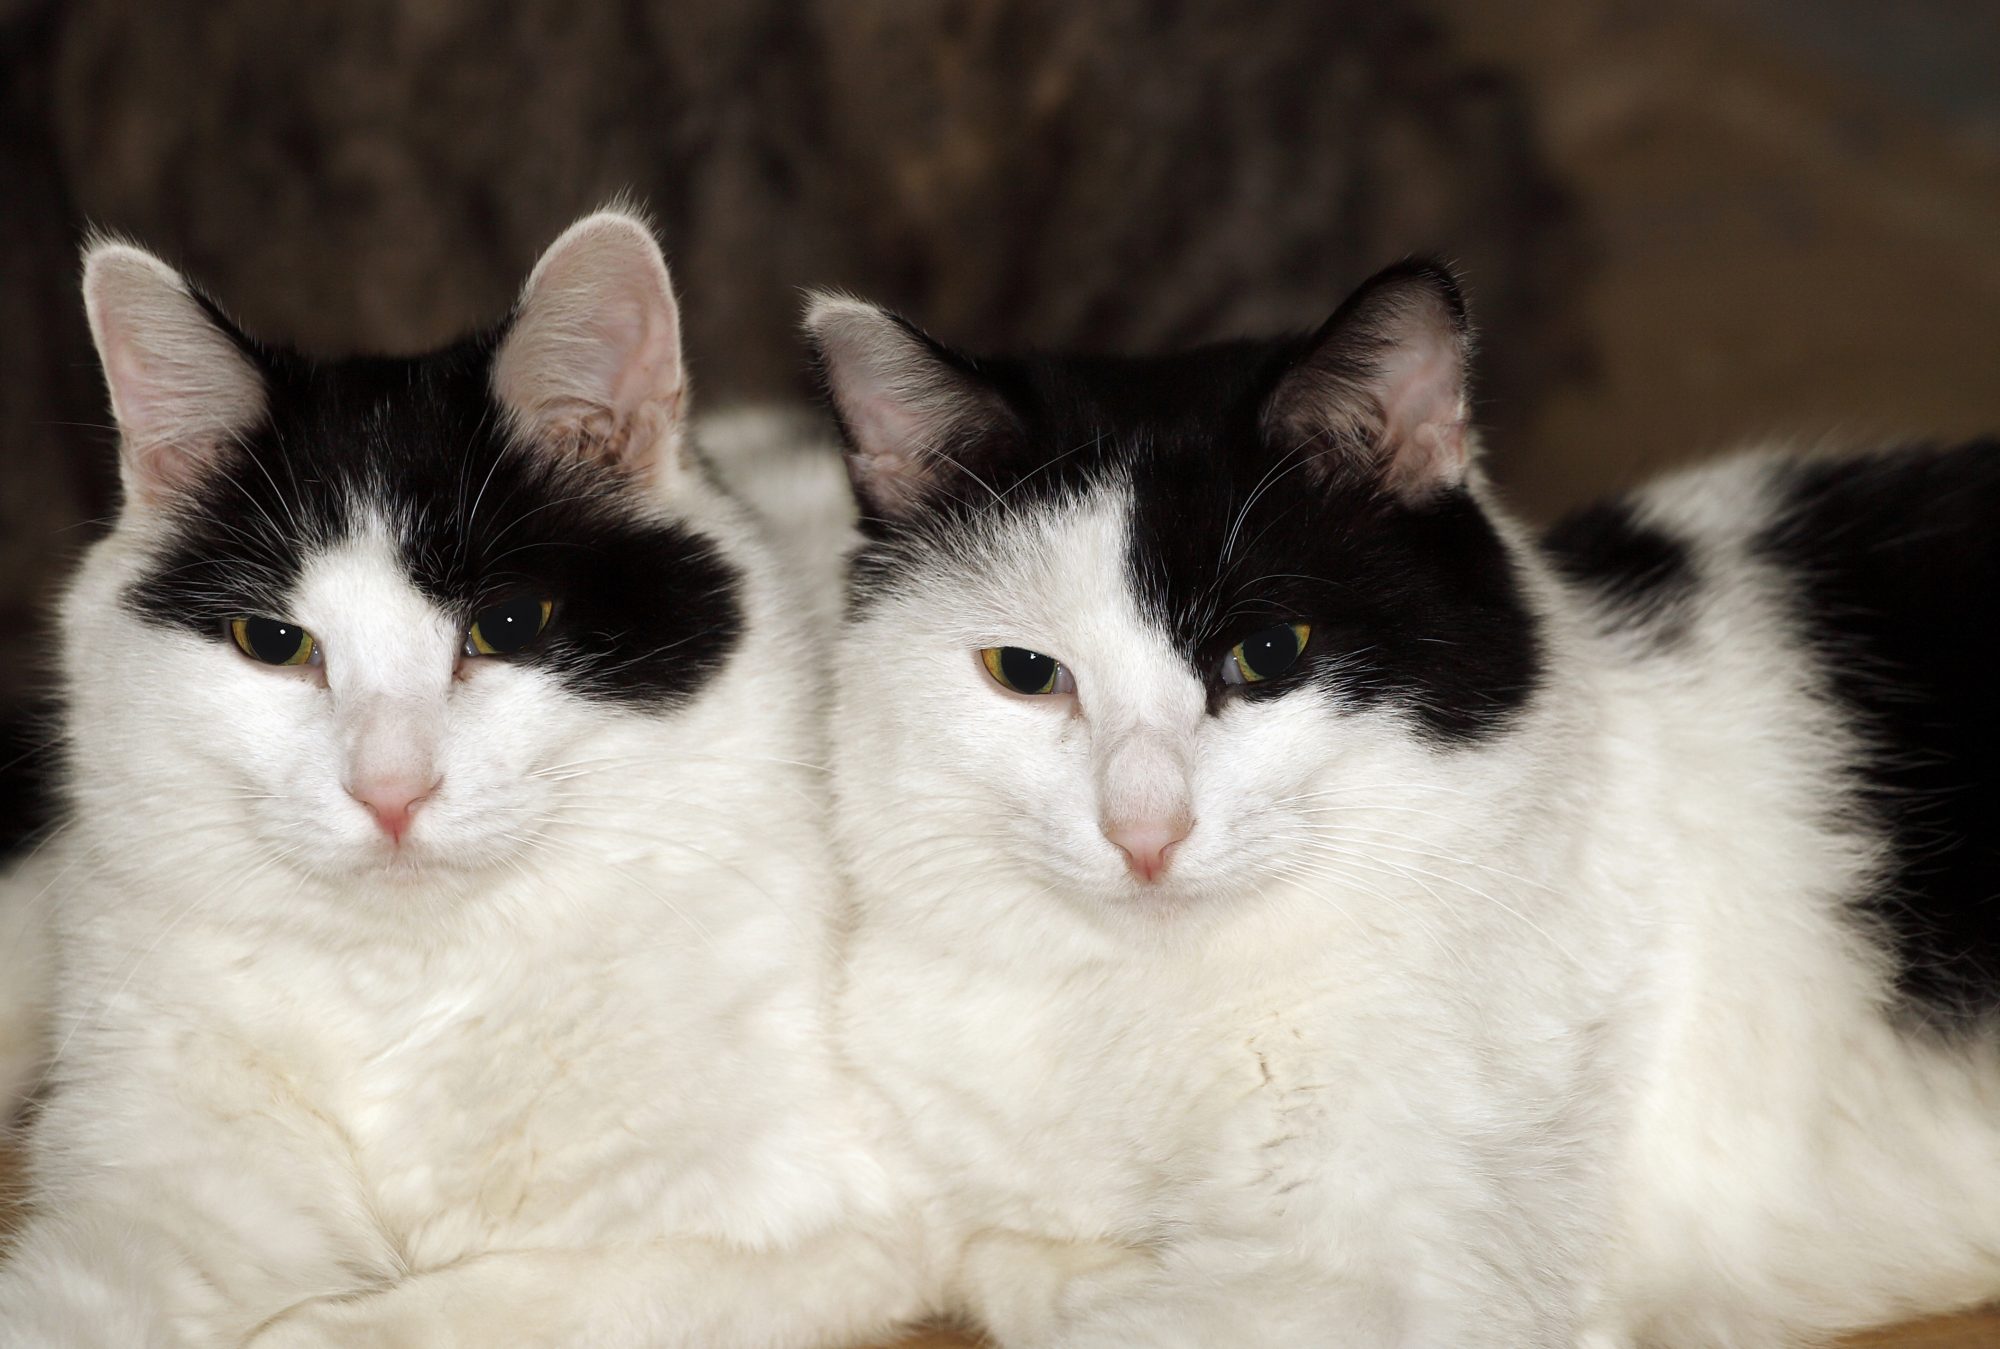 twin black and white cats sat together